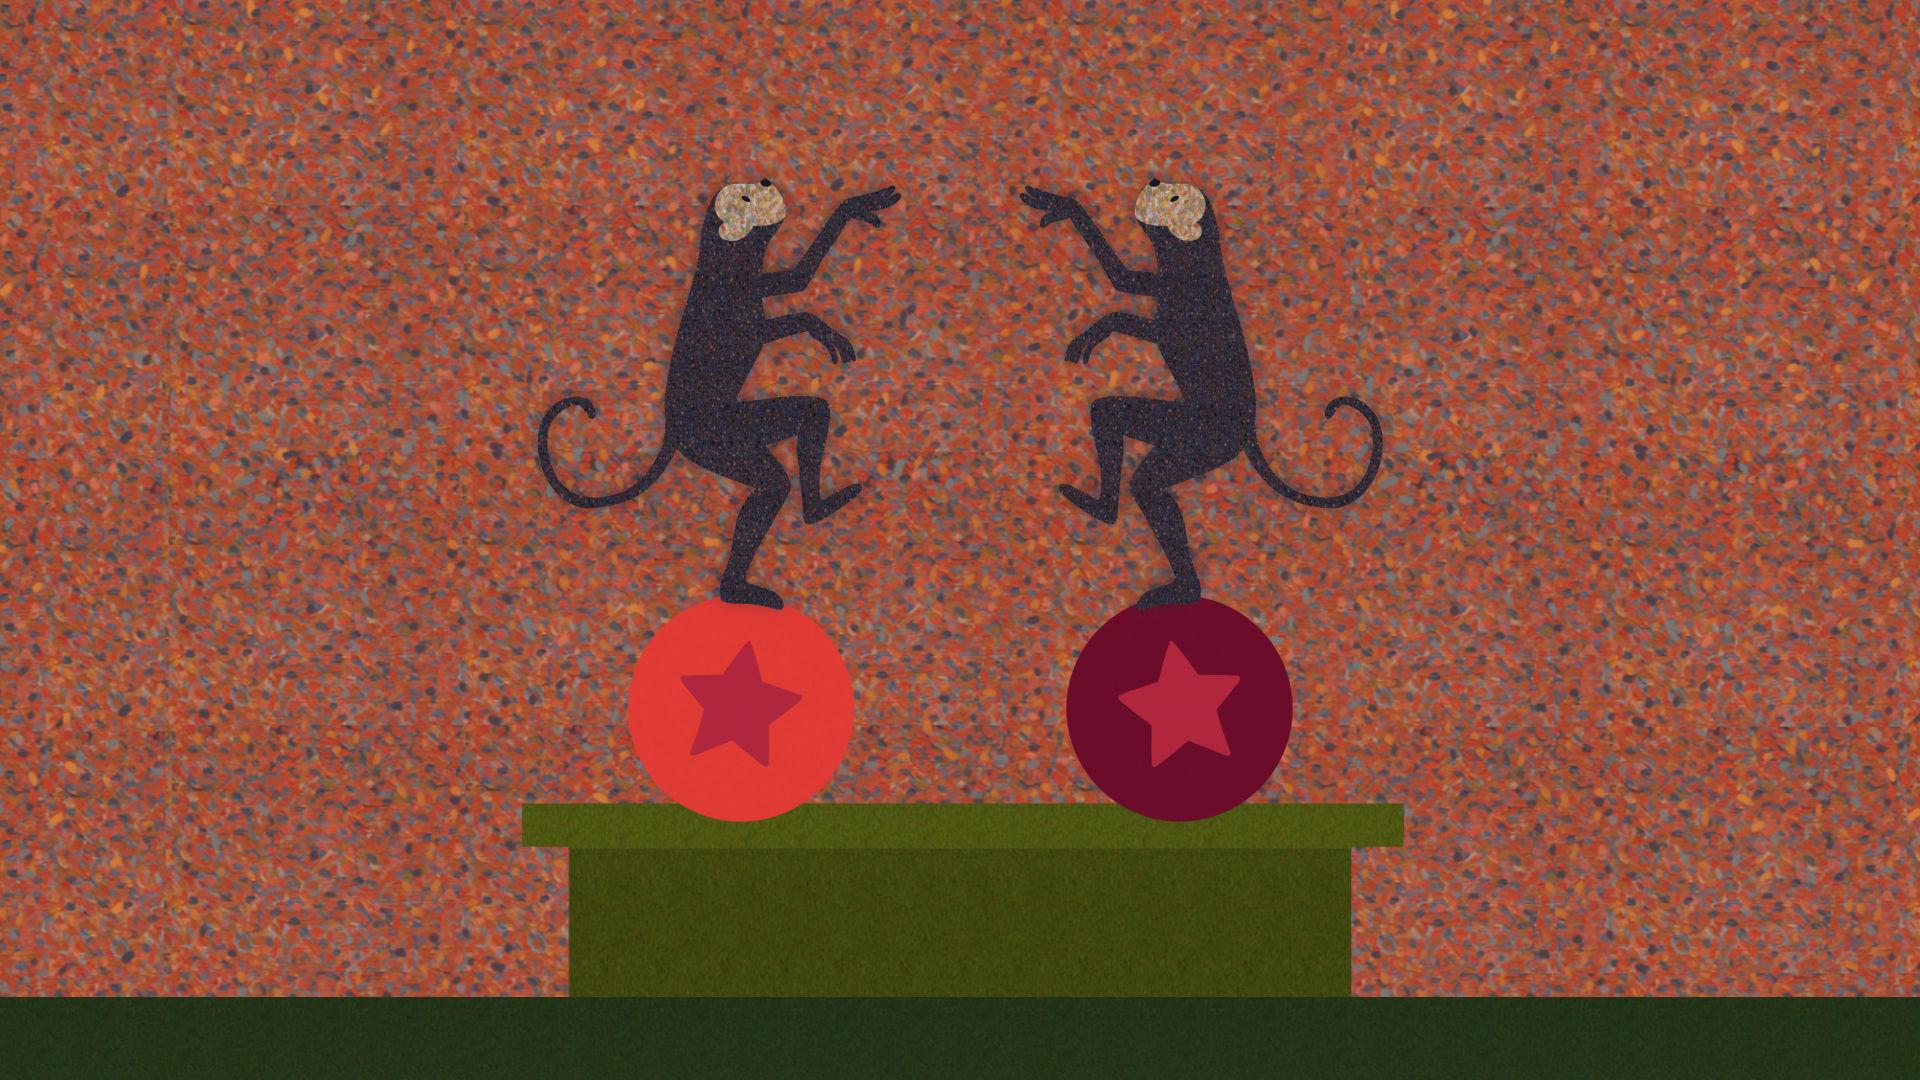 Two circus monkeys appear on stage balancing atop balls, each adorned with a mauve-colored star.